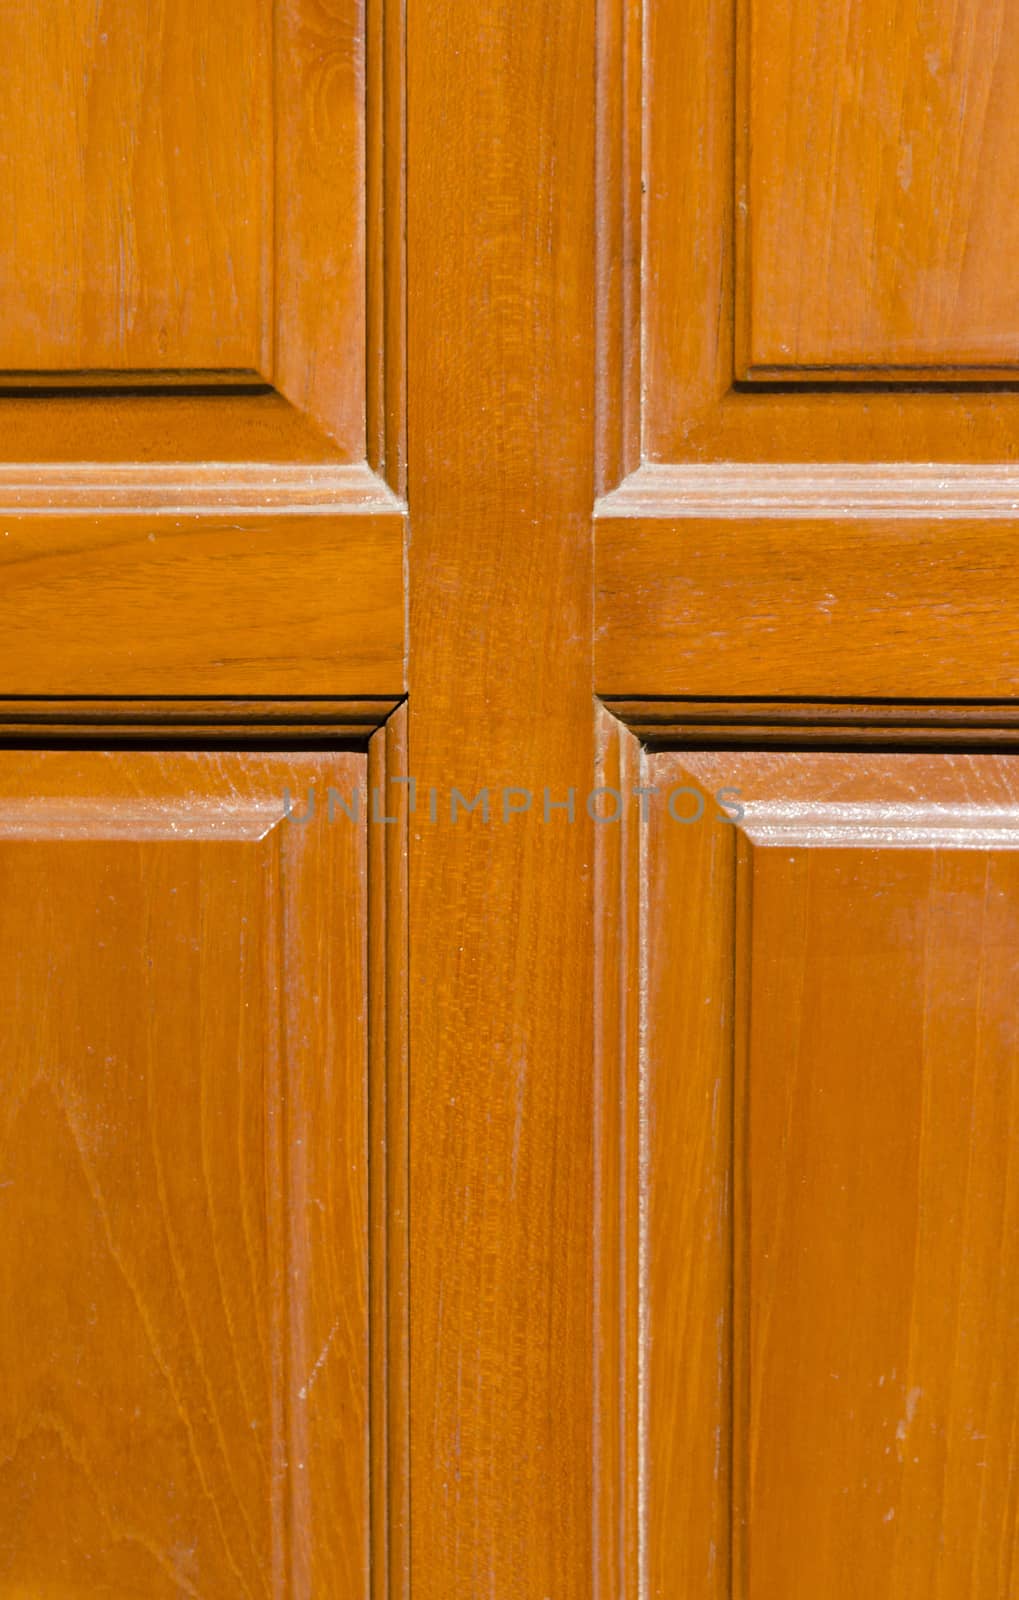 The door that made of wood is classic.